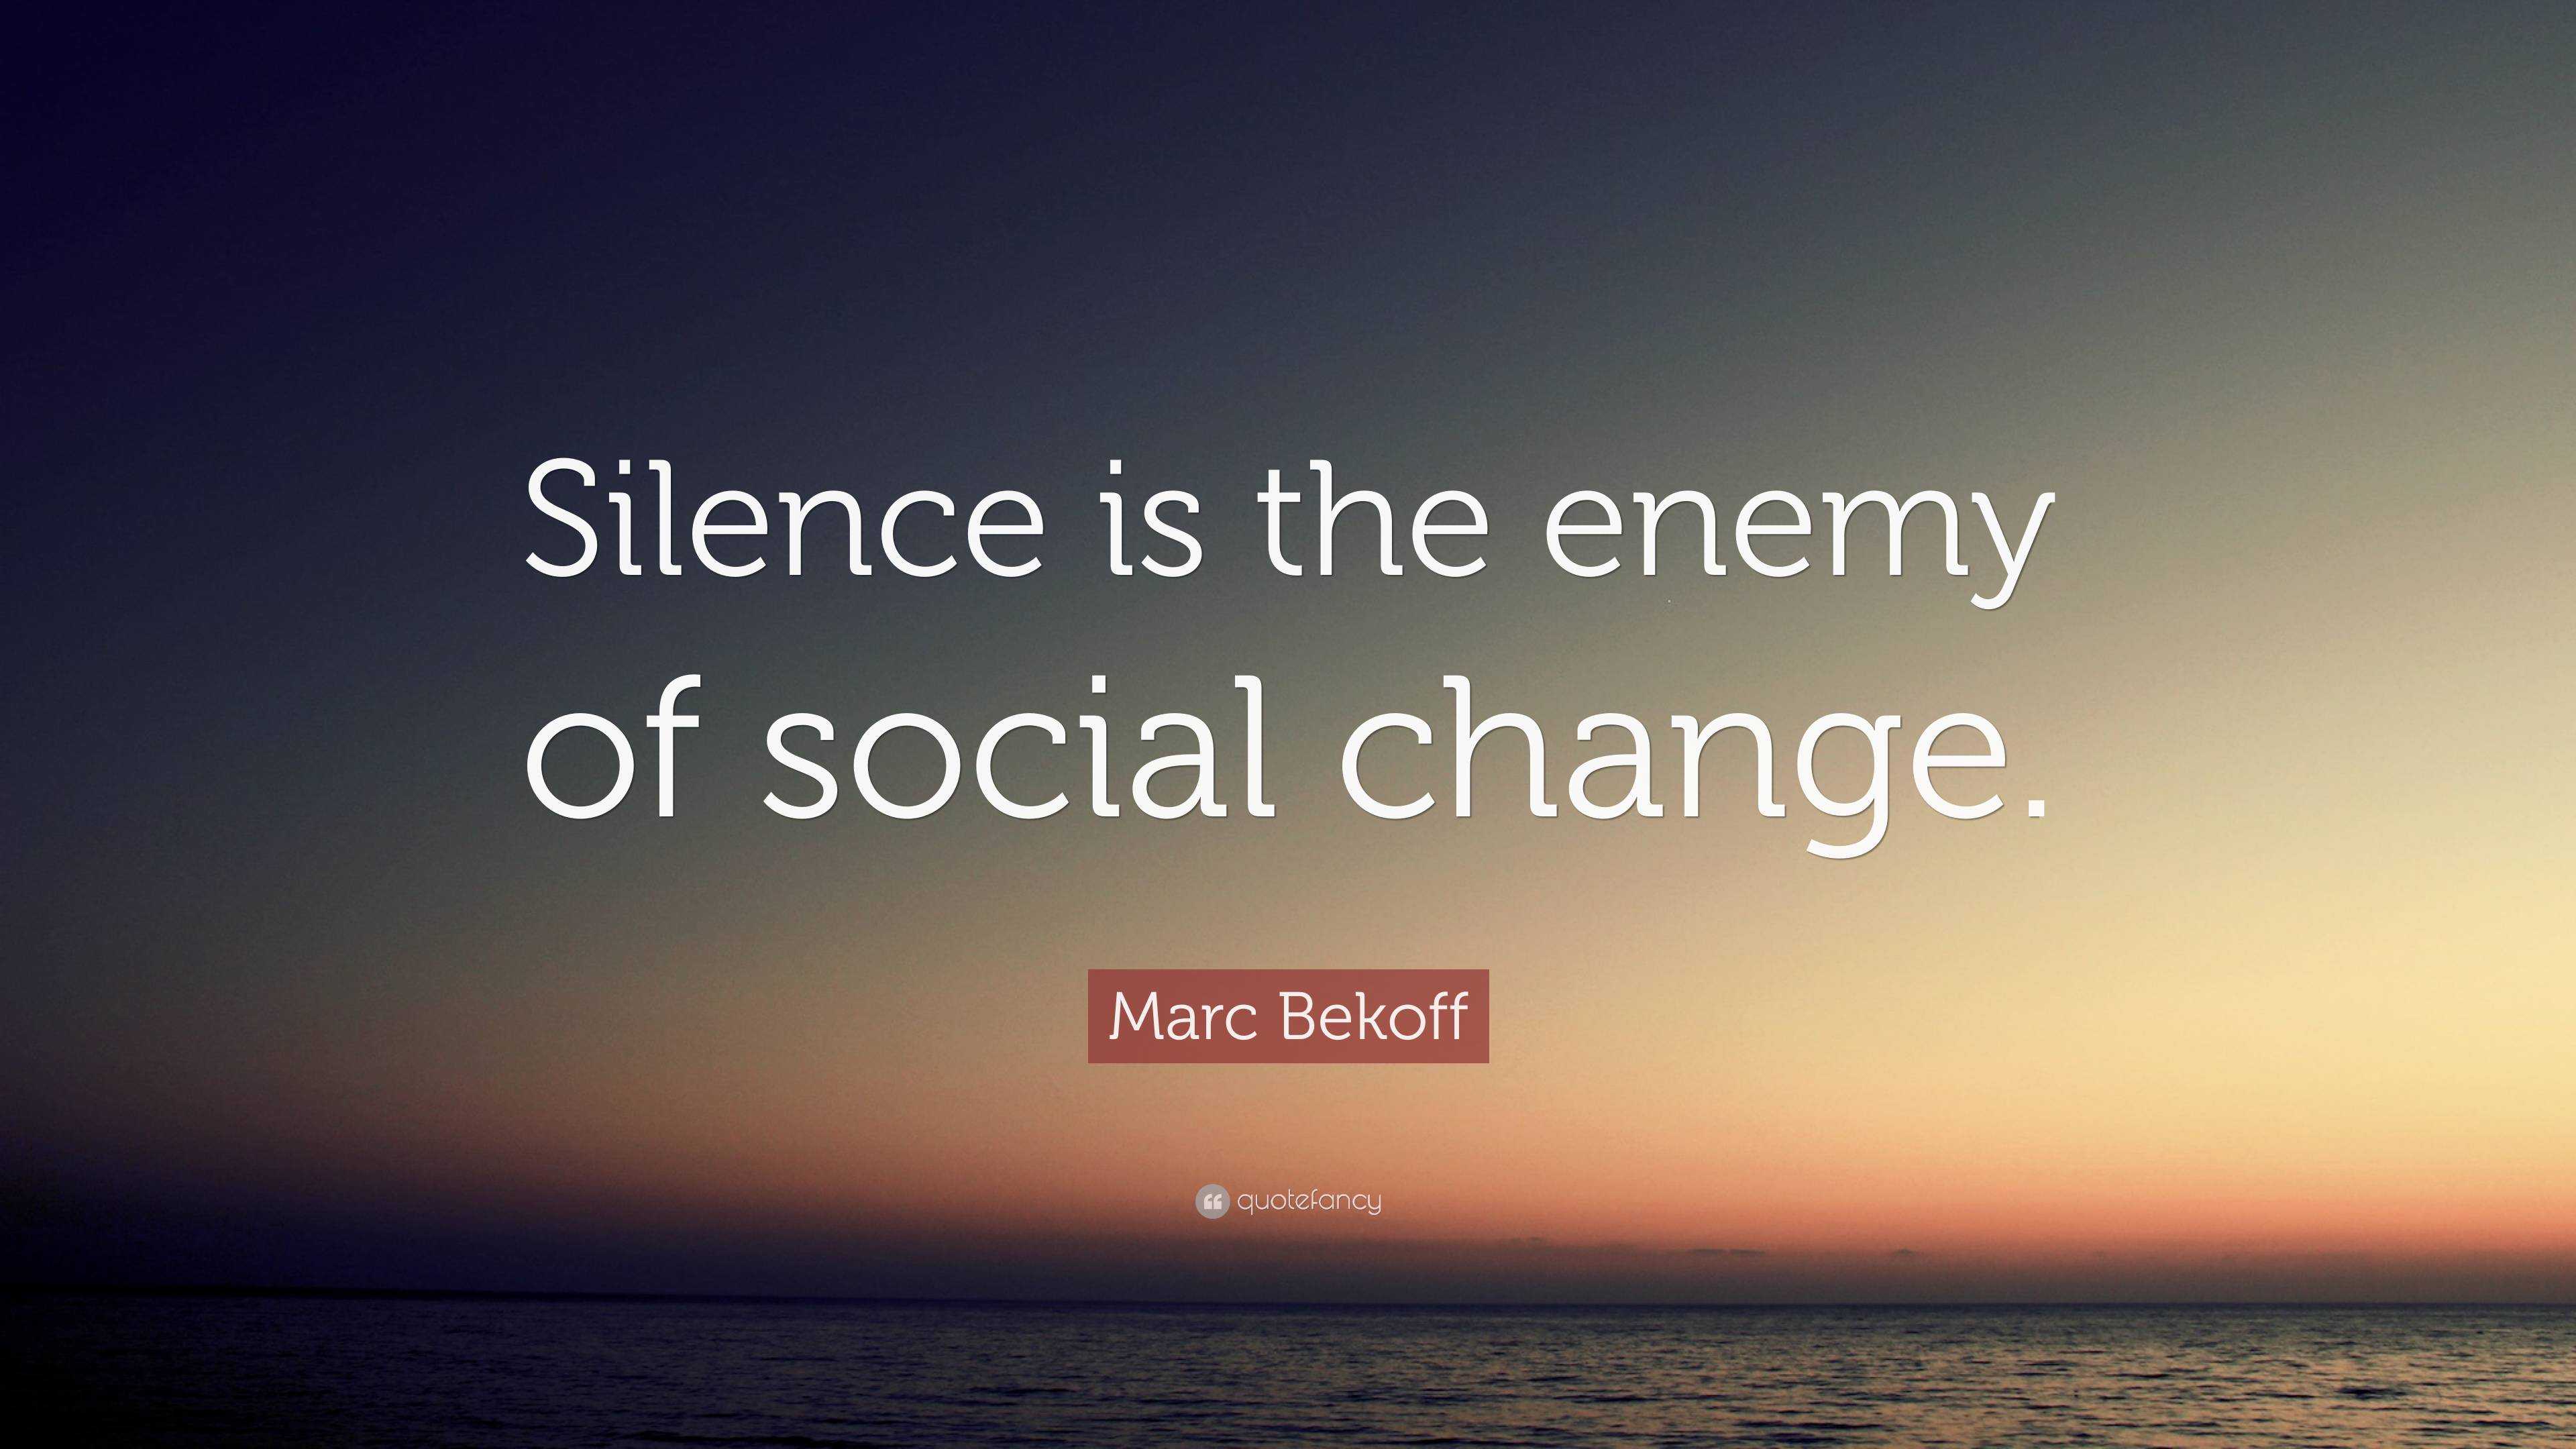 Marc Bekoff Quote: “Silence is the enemy of social change.”